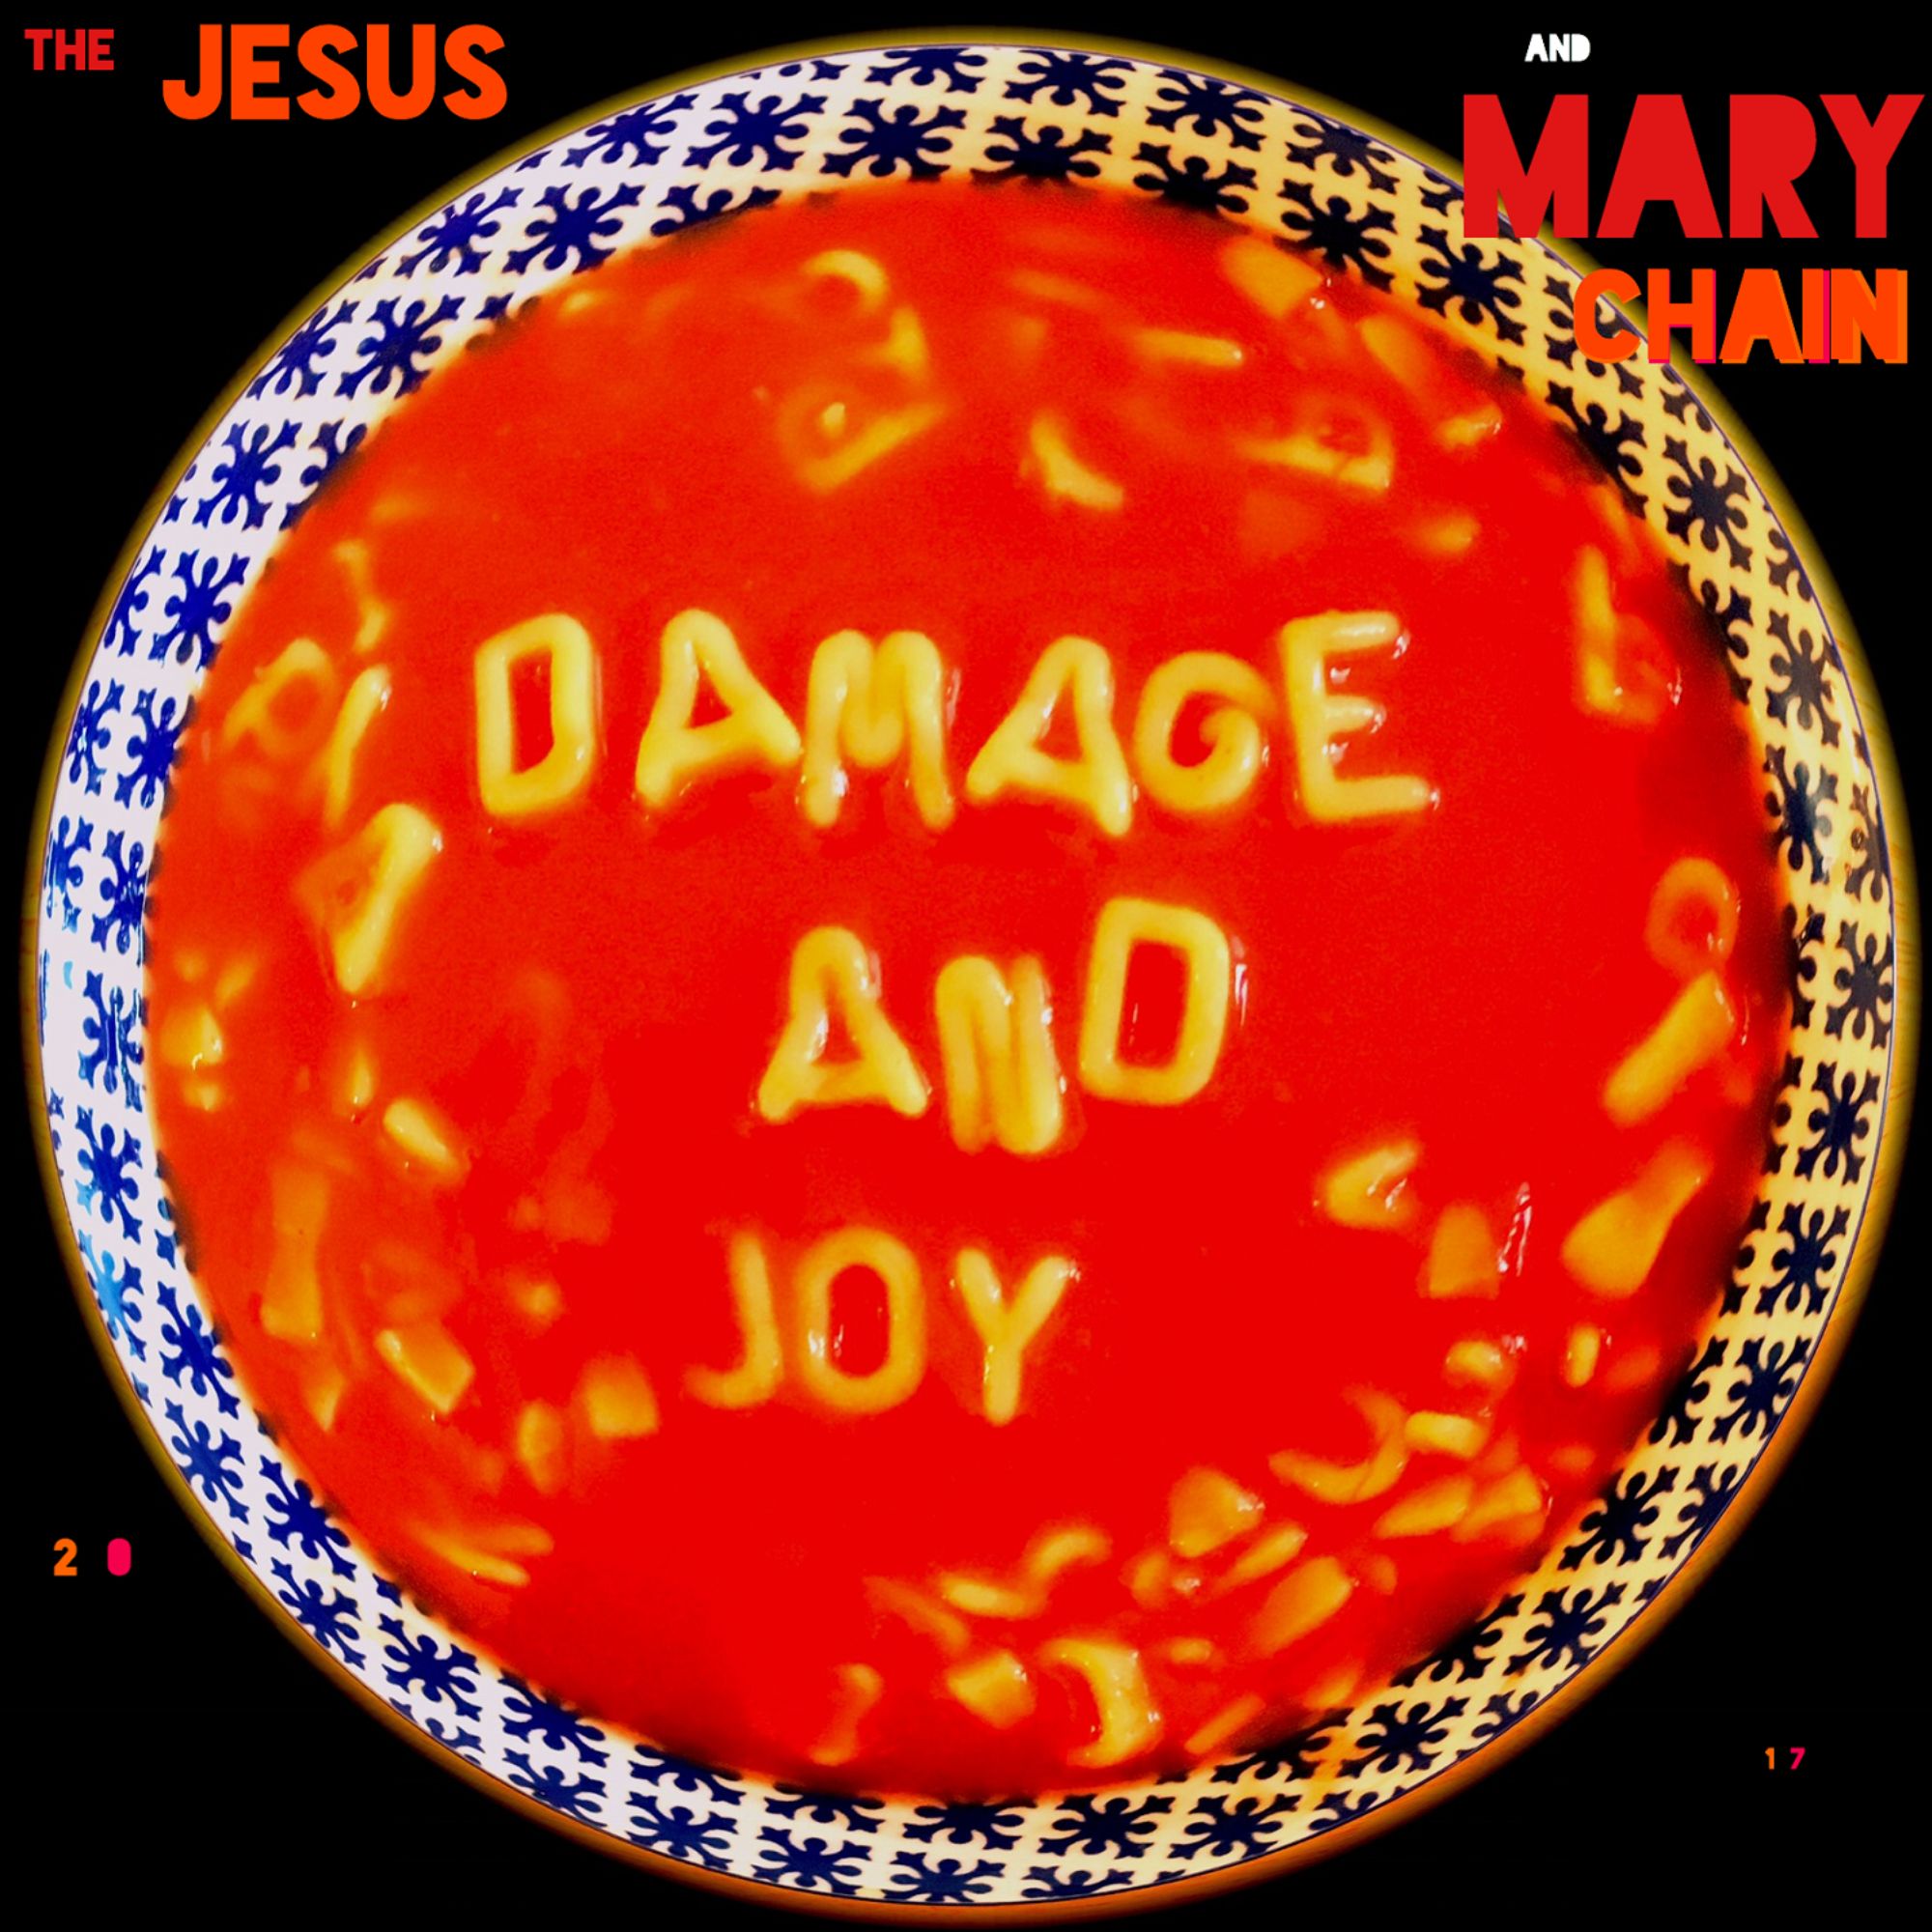 The Jesus And Mary Chain – Damage And Joy (2017) [HDTracks FLAC 24bit/44,1kHz]